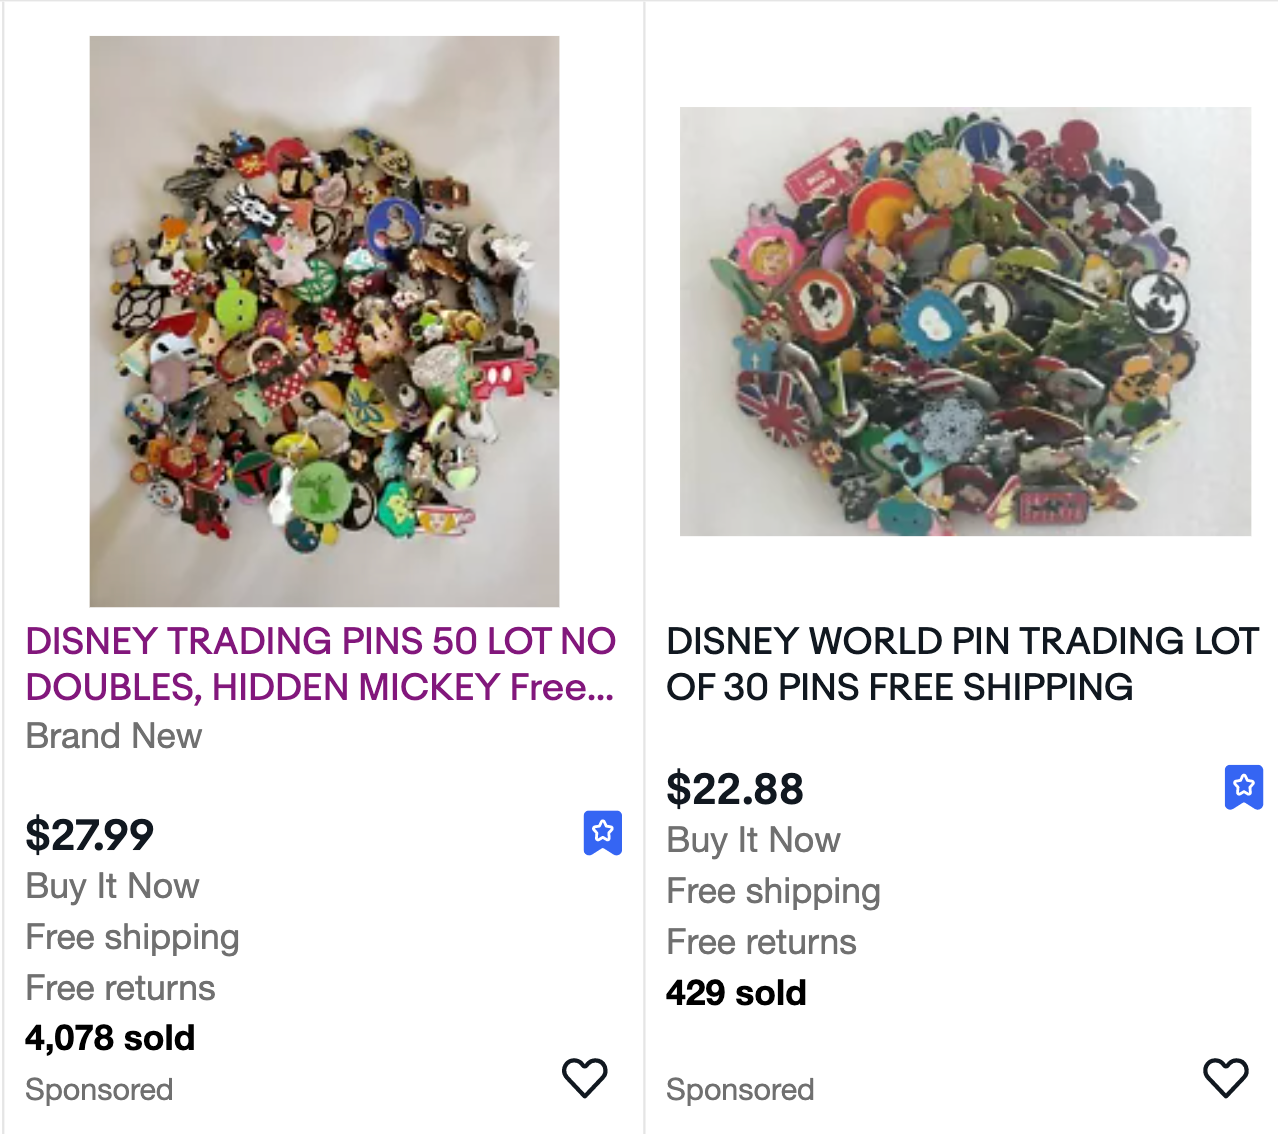 We have a limited quantity of Disney Pin Lot clearance pins for